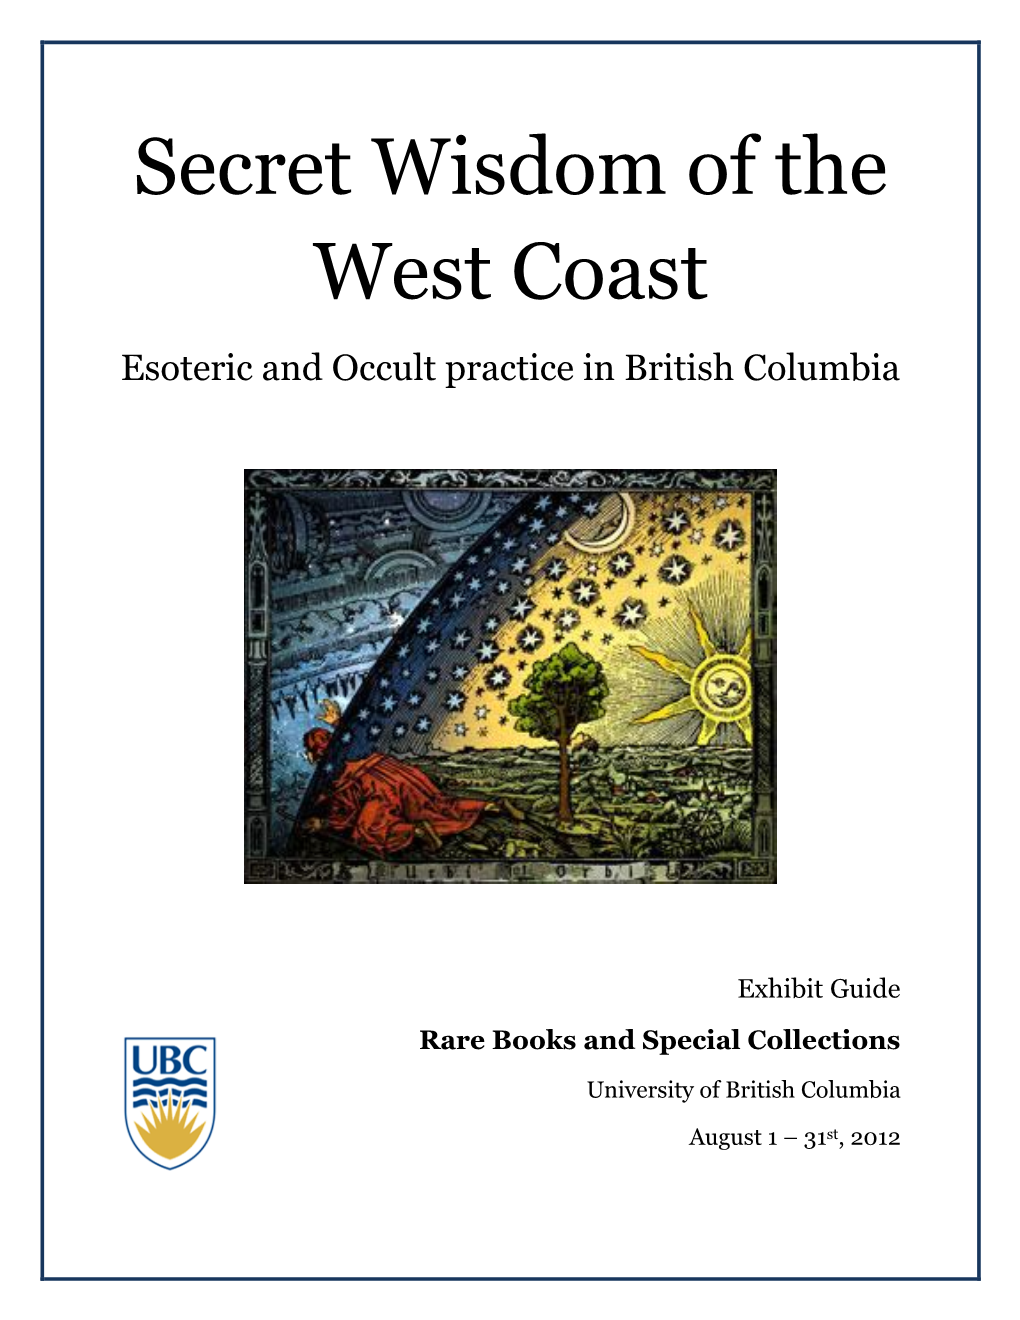 Secret Wisdom of the West Coast Esoteric and Occult Practice in British Columbia